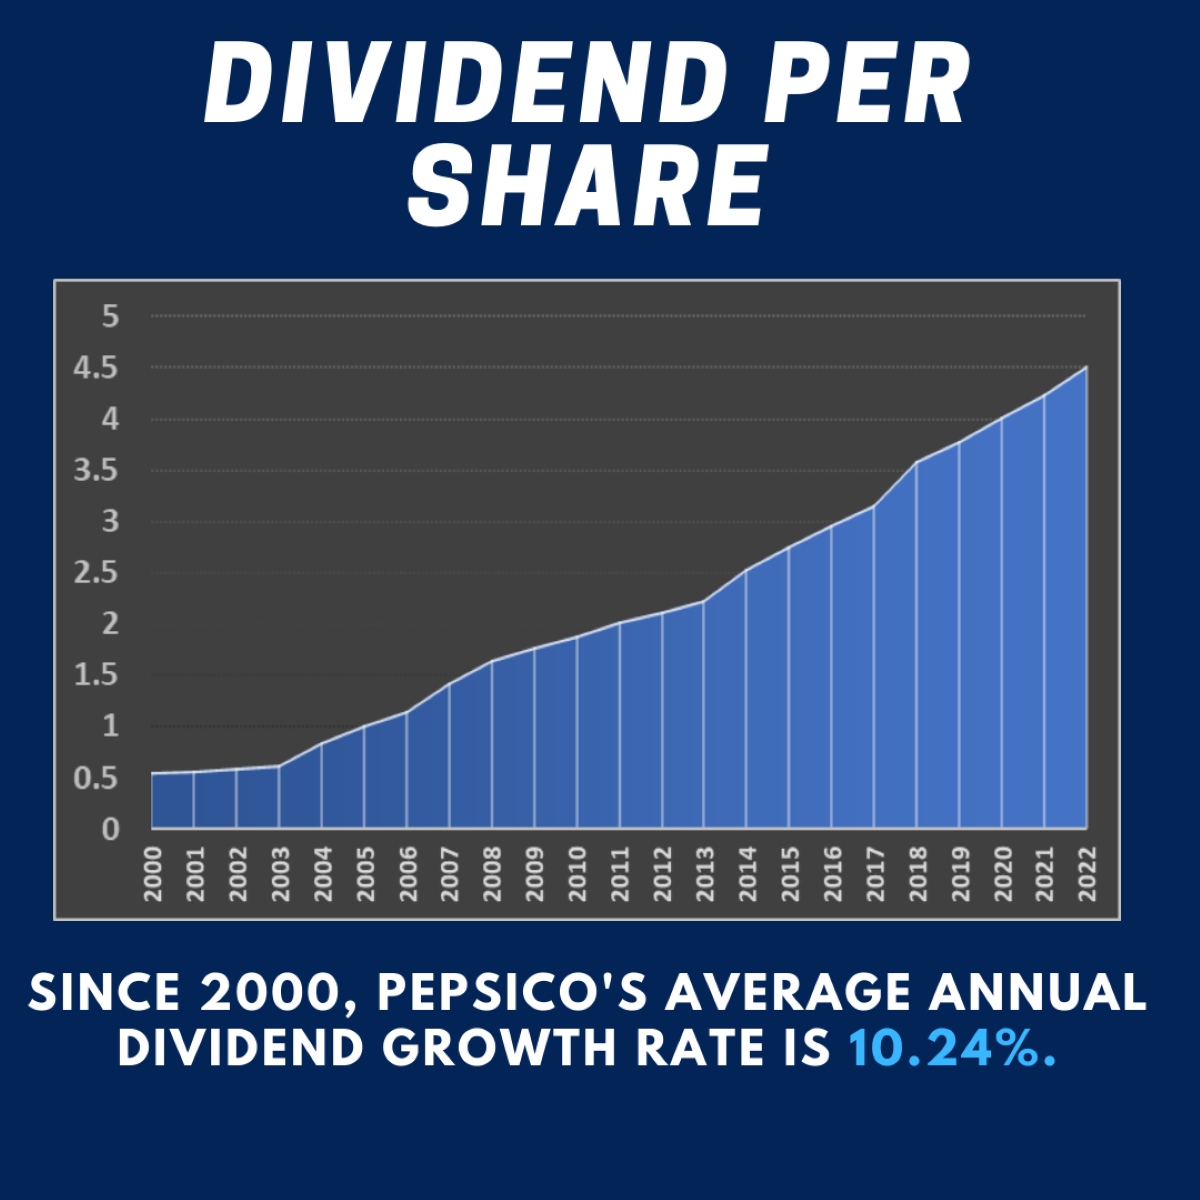 When Does PepsiCo Pay Dividends?